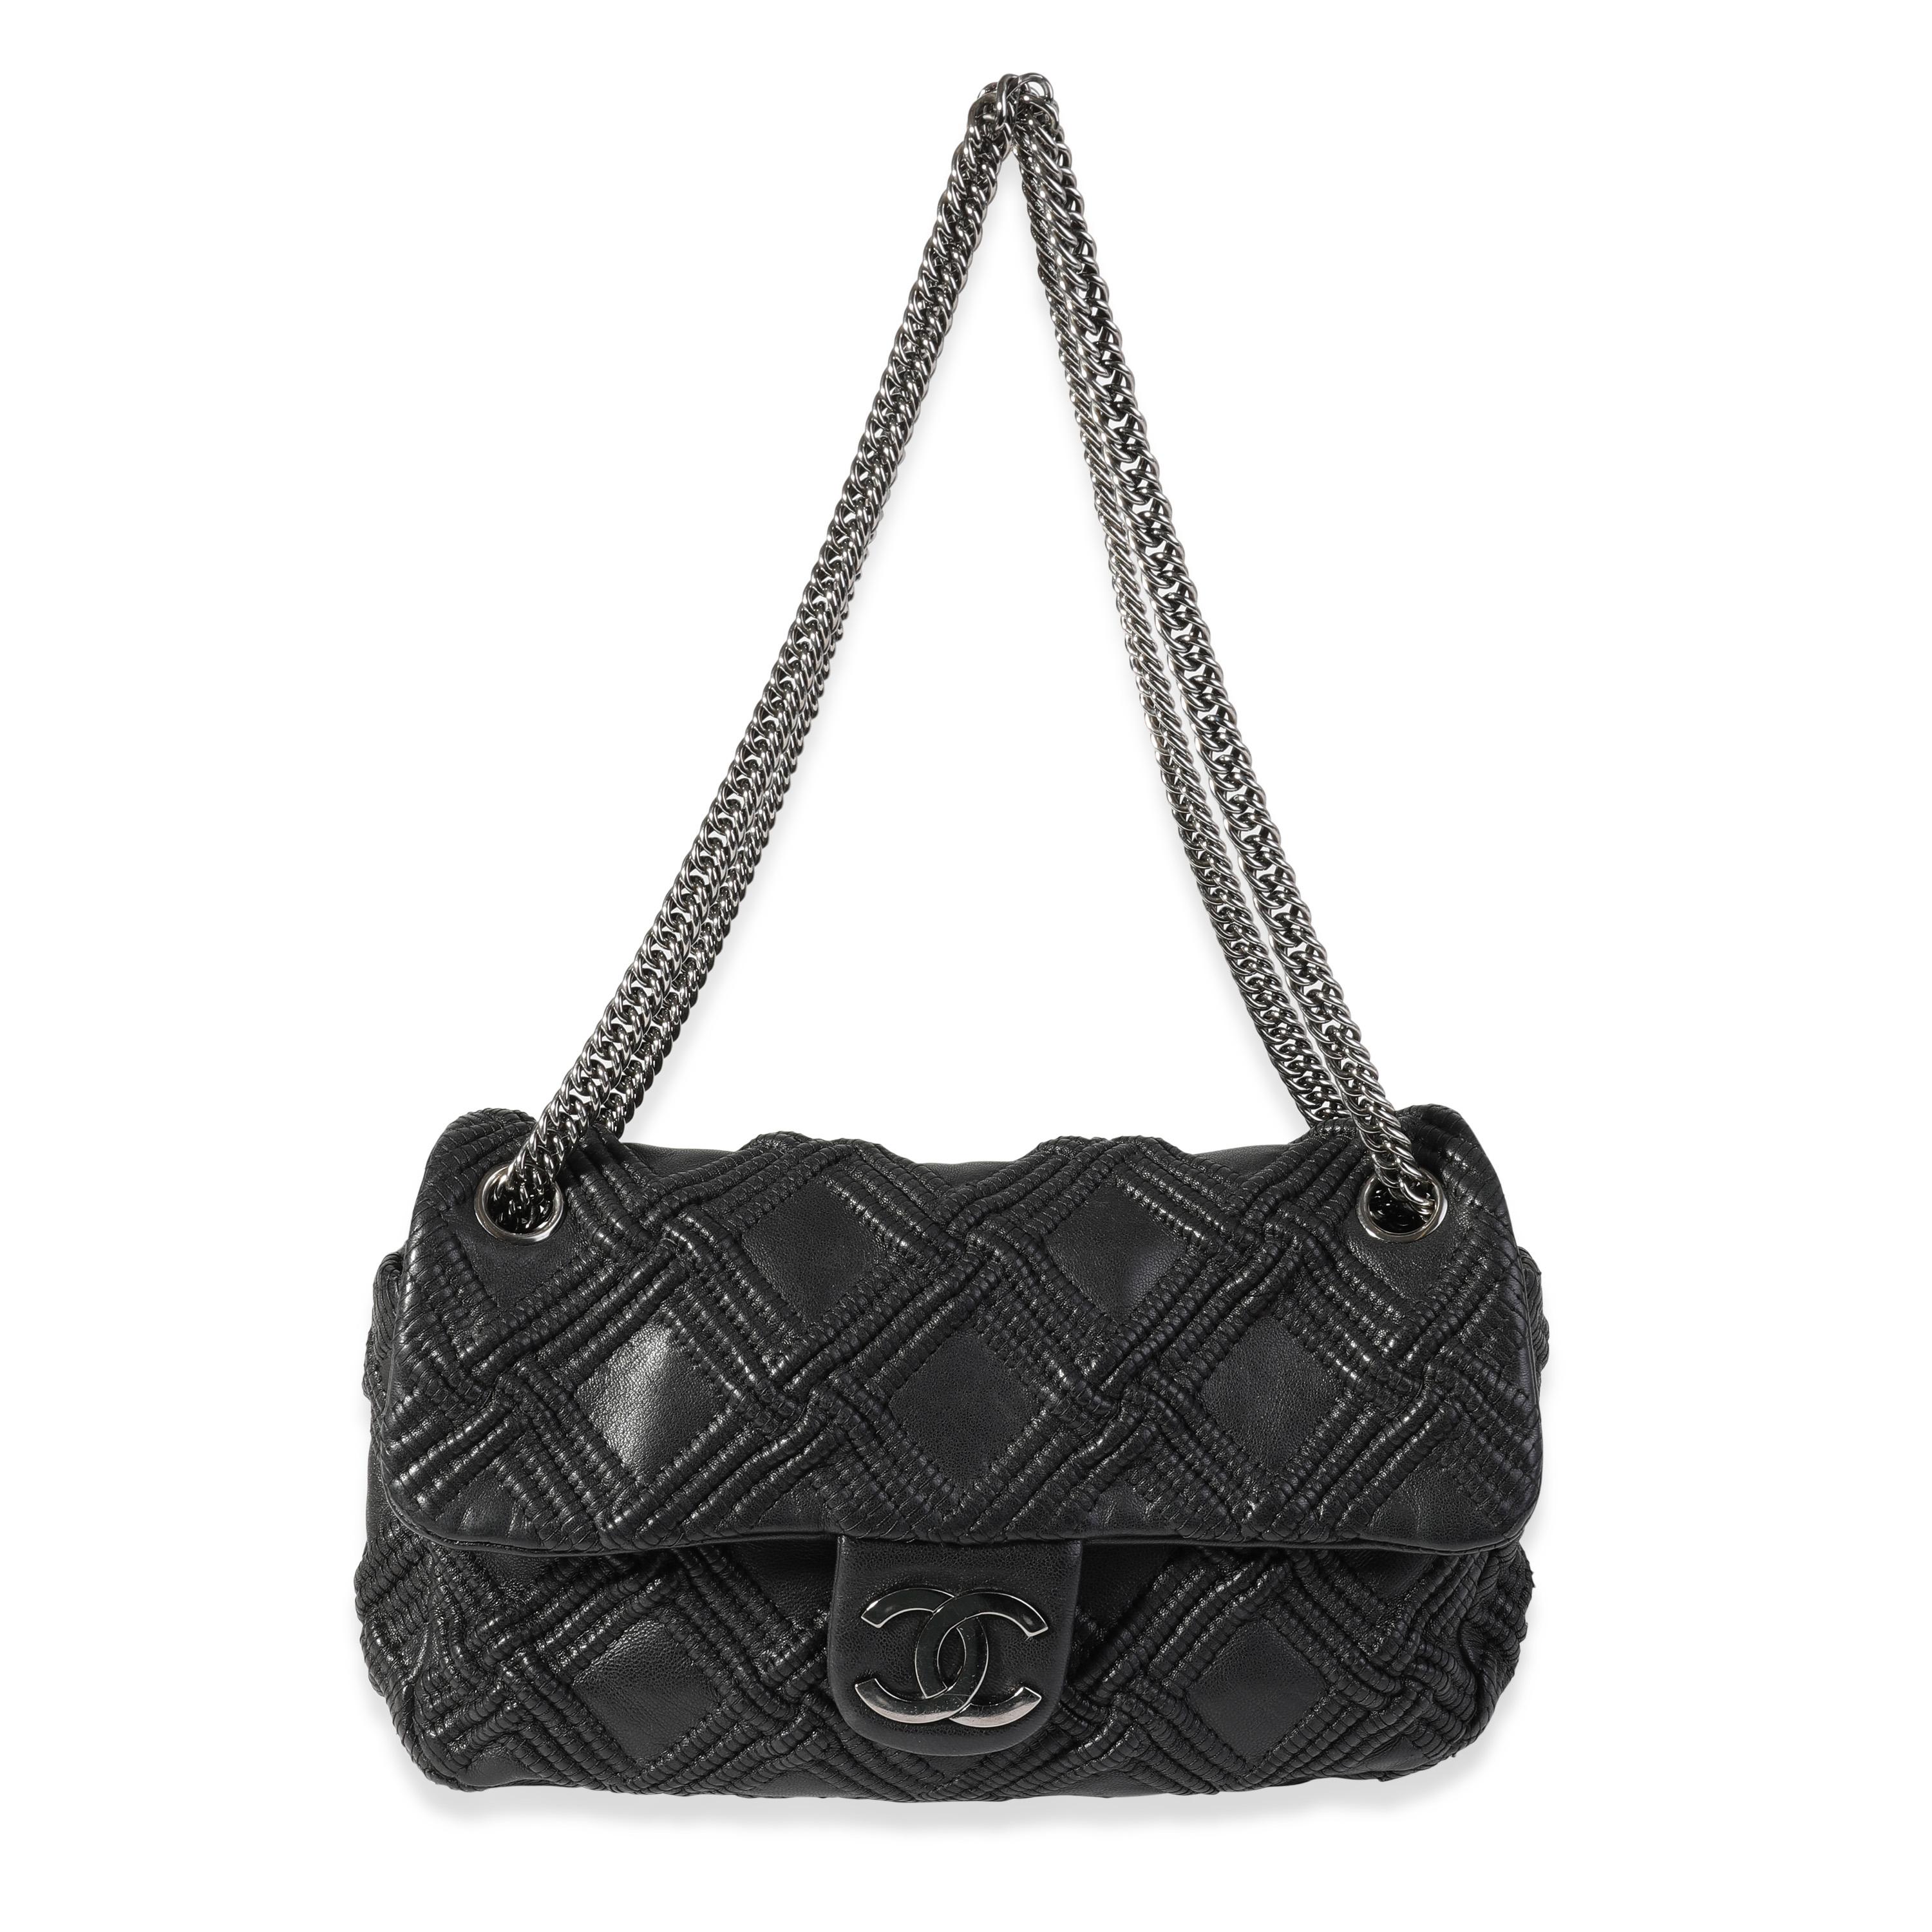 Listing Title: Chanel Black Woven Grid Leather Single Flap Bag
SKU: 121317
Condition: Pre-owned 
Handbag Condition: Very Good
Condition Comments: Very Good Condition. Light scuffing to corners and exterior. Light peeling to base. Scratching to